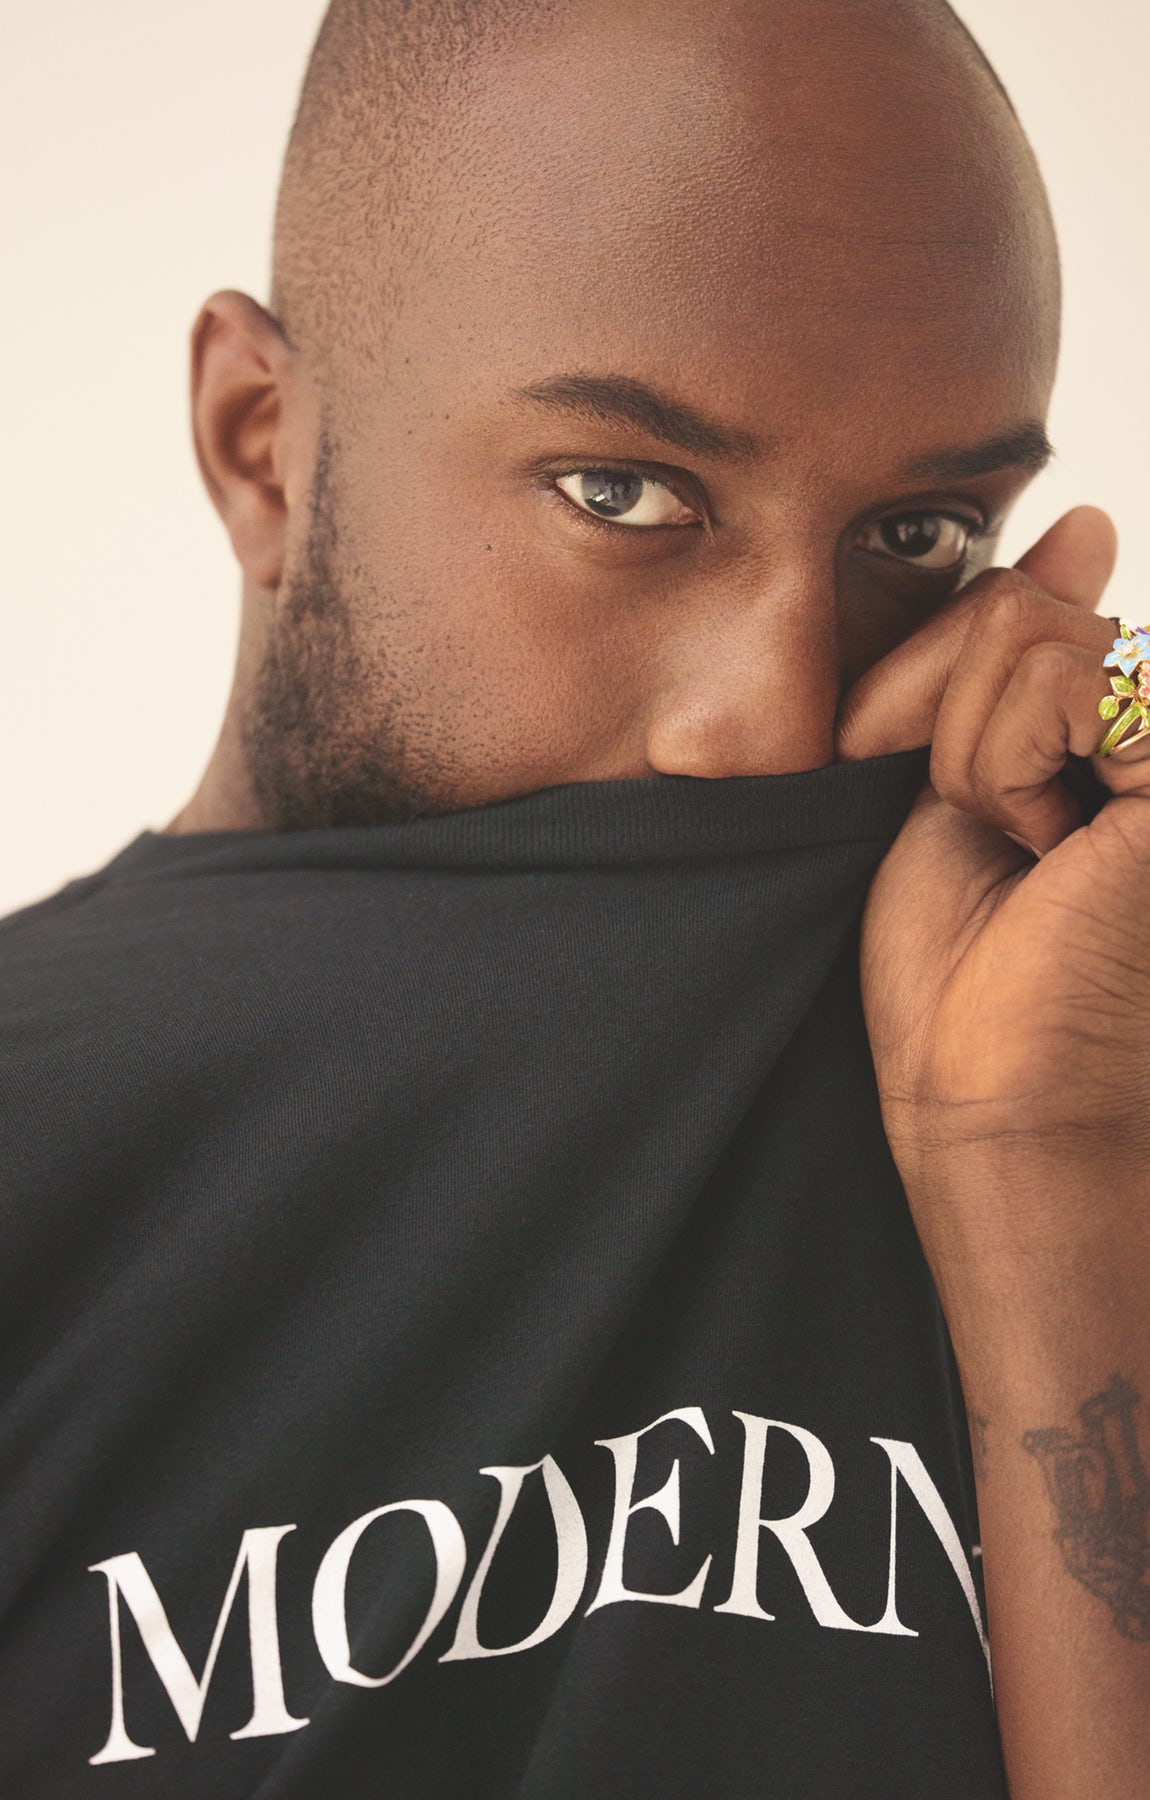 Off-White's Virgil Abloh Is the Creative Director Everyone Wants